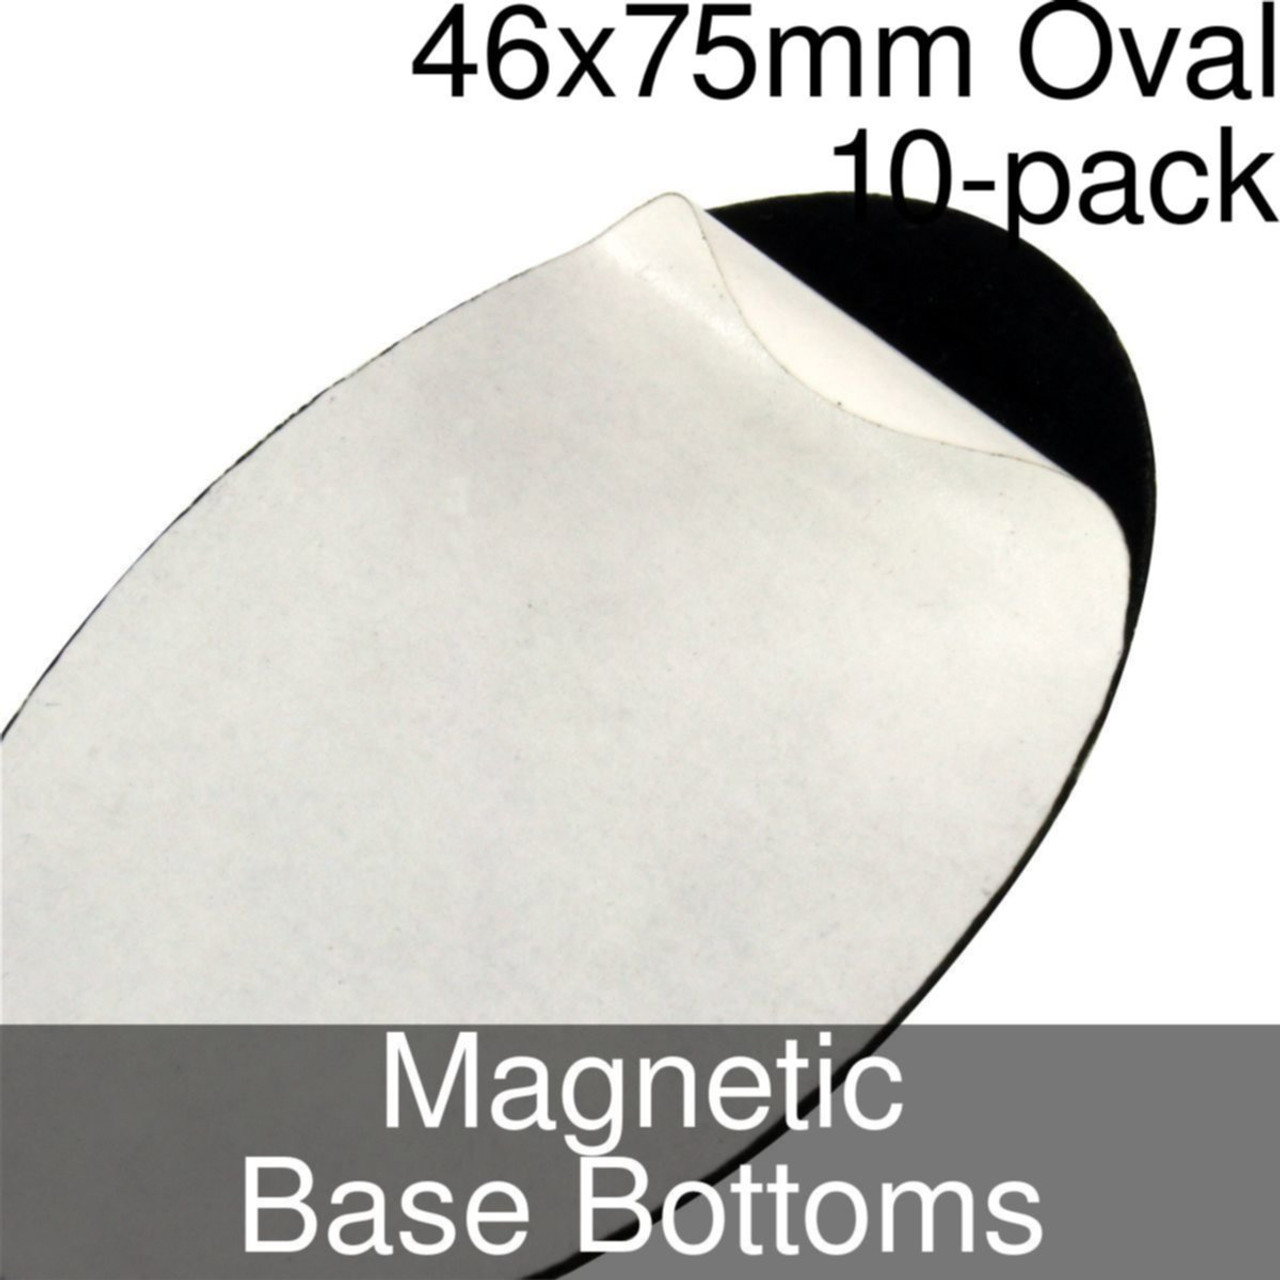 46x75mm Oval Self Adhesive Magnetic Base Bottom 10 Count